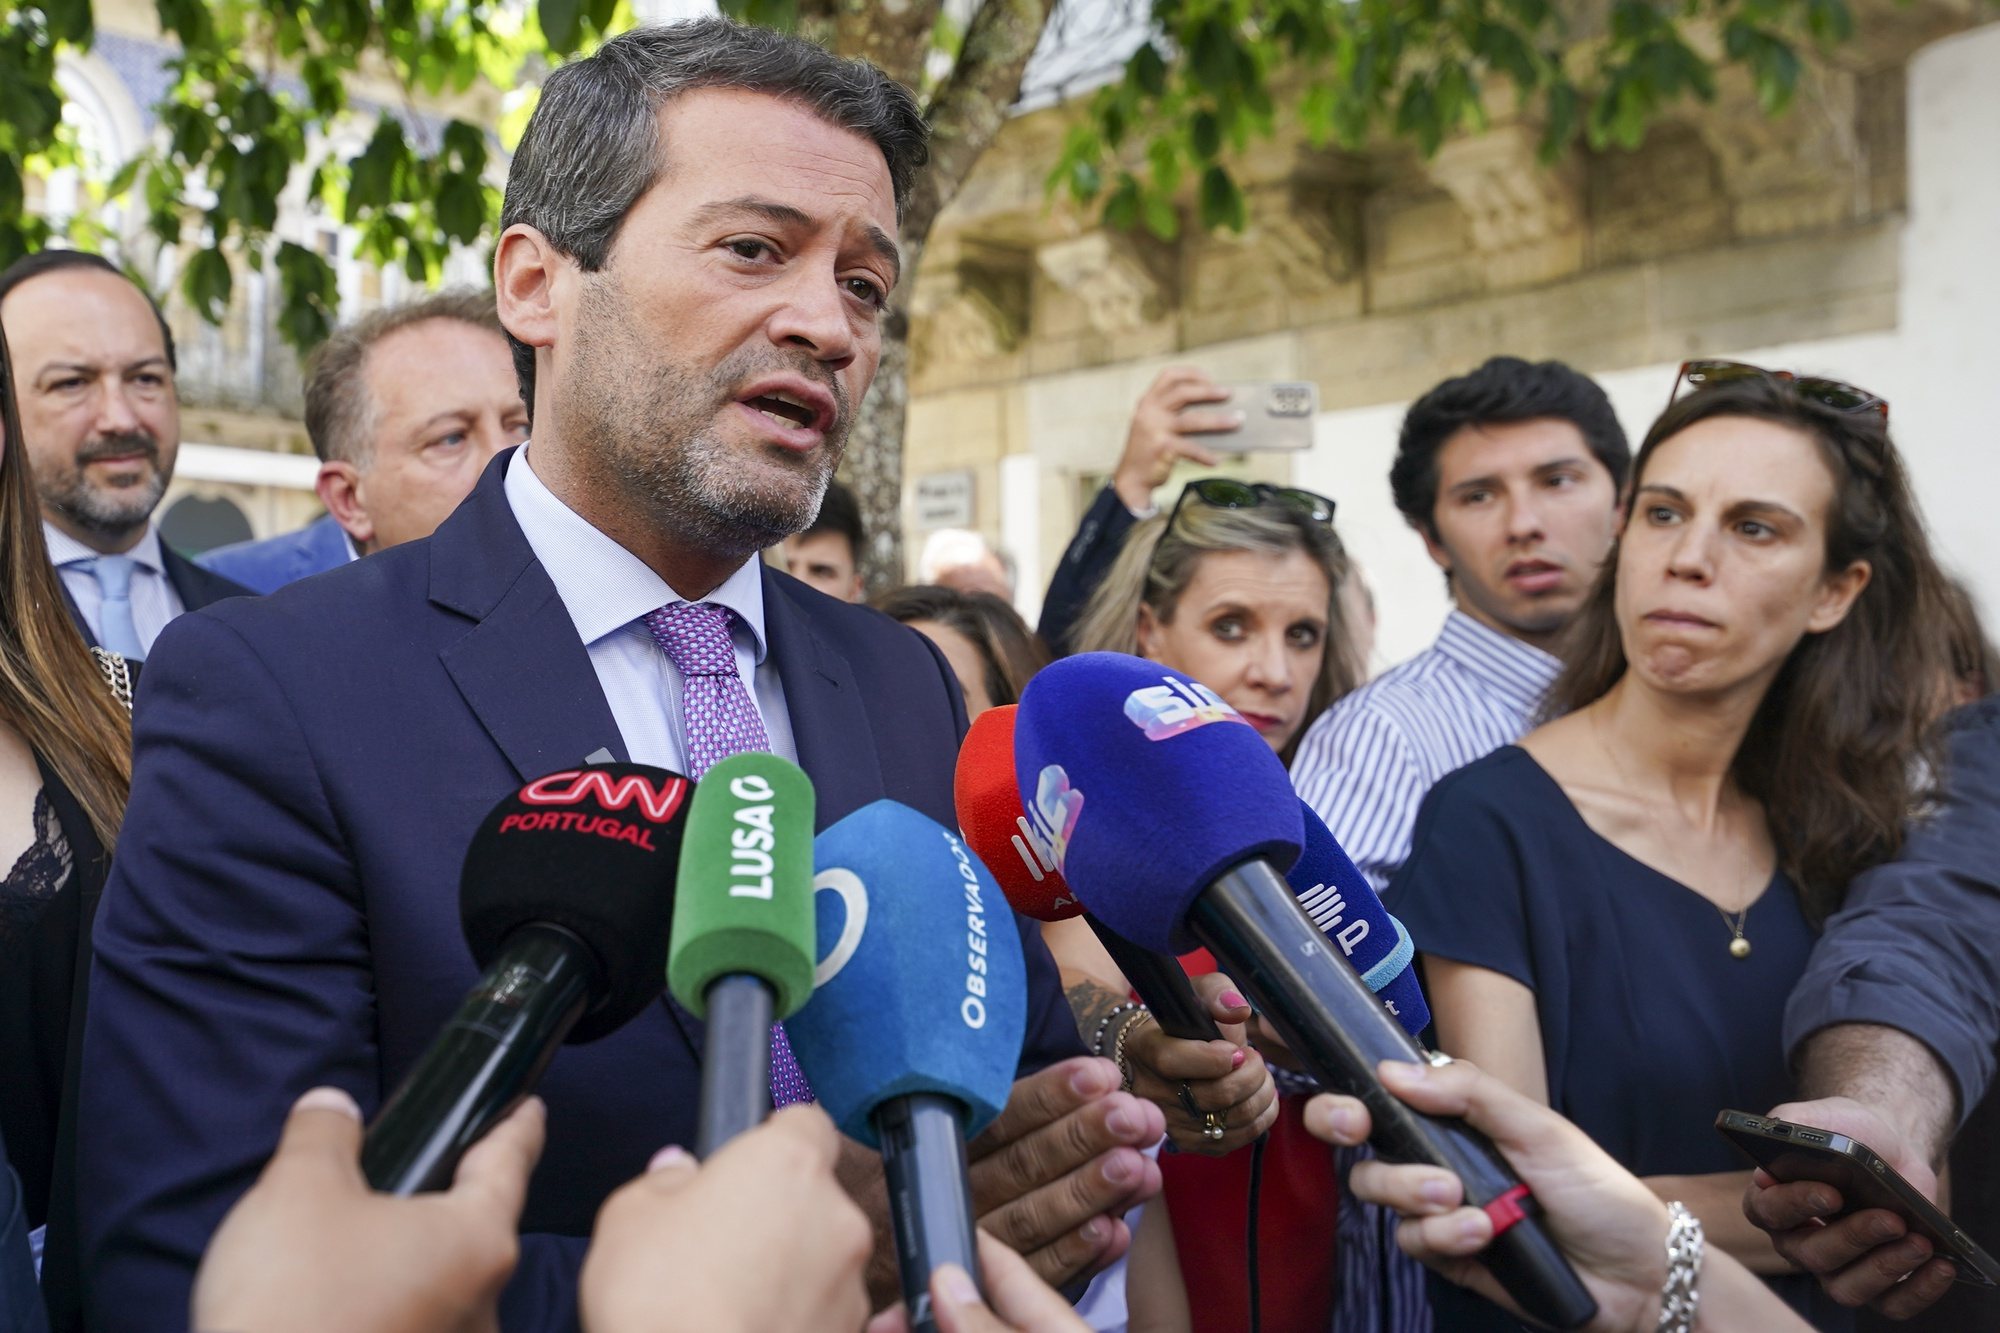 The President of the right-wing party Chega Andre Ventura speaks to media during a campaign event on the last day of the campaign for the 2024 European elections, in Valenca, Portugal, 07 June 2024. In Portugal, the European elections take place on 09 June and will be contested by 17 parties and coalitions. HUGO DELGADO/LUSA